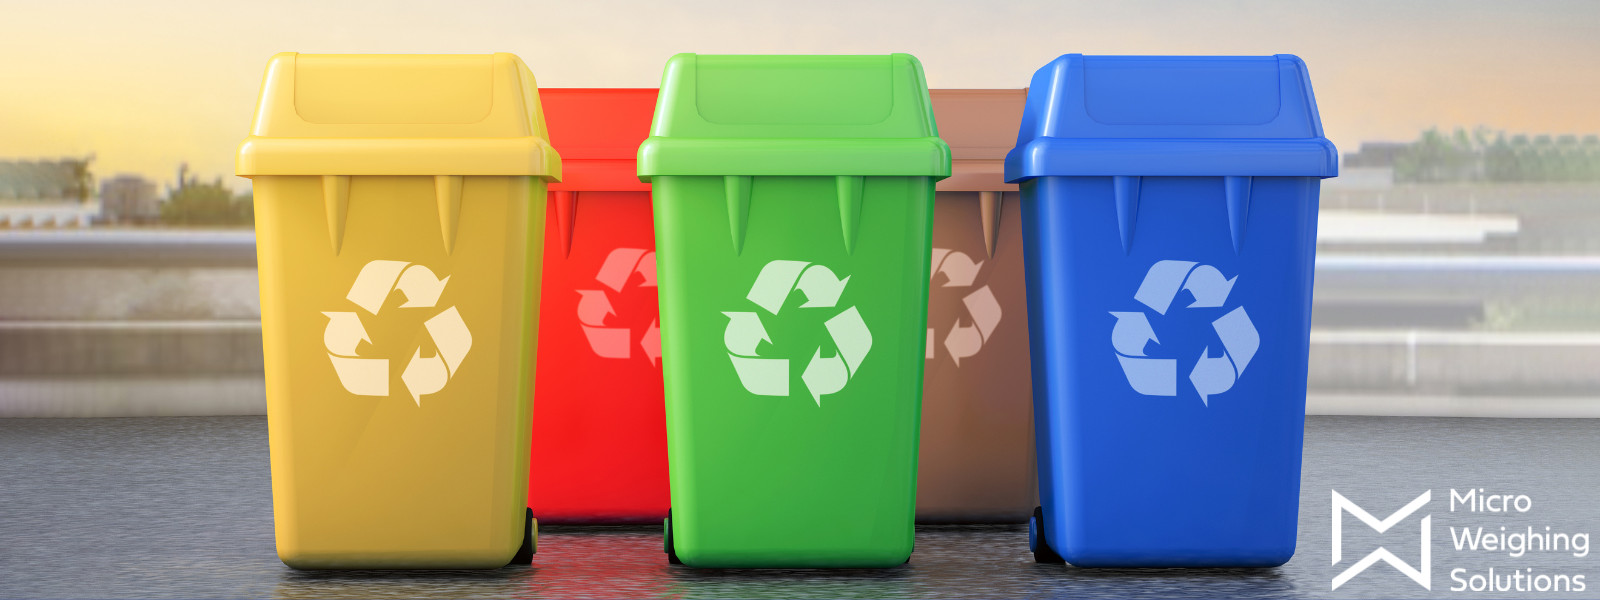 Making Waste Management More Efficient and Sustain...